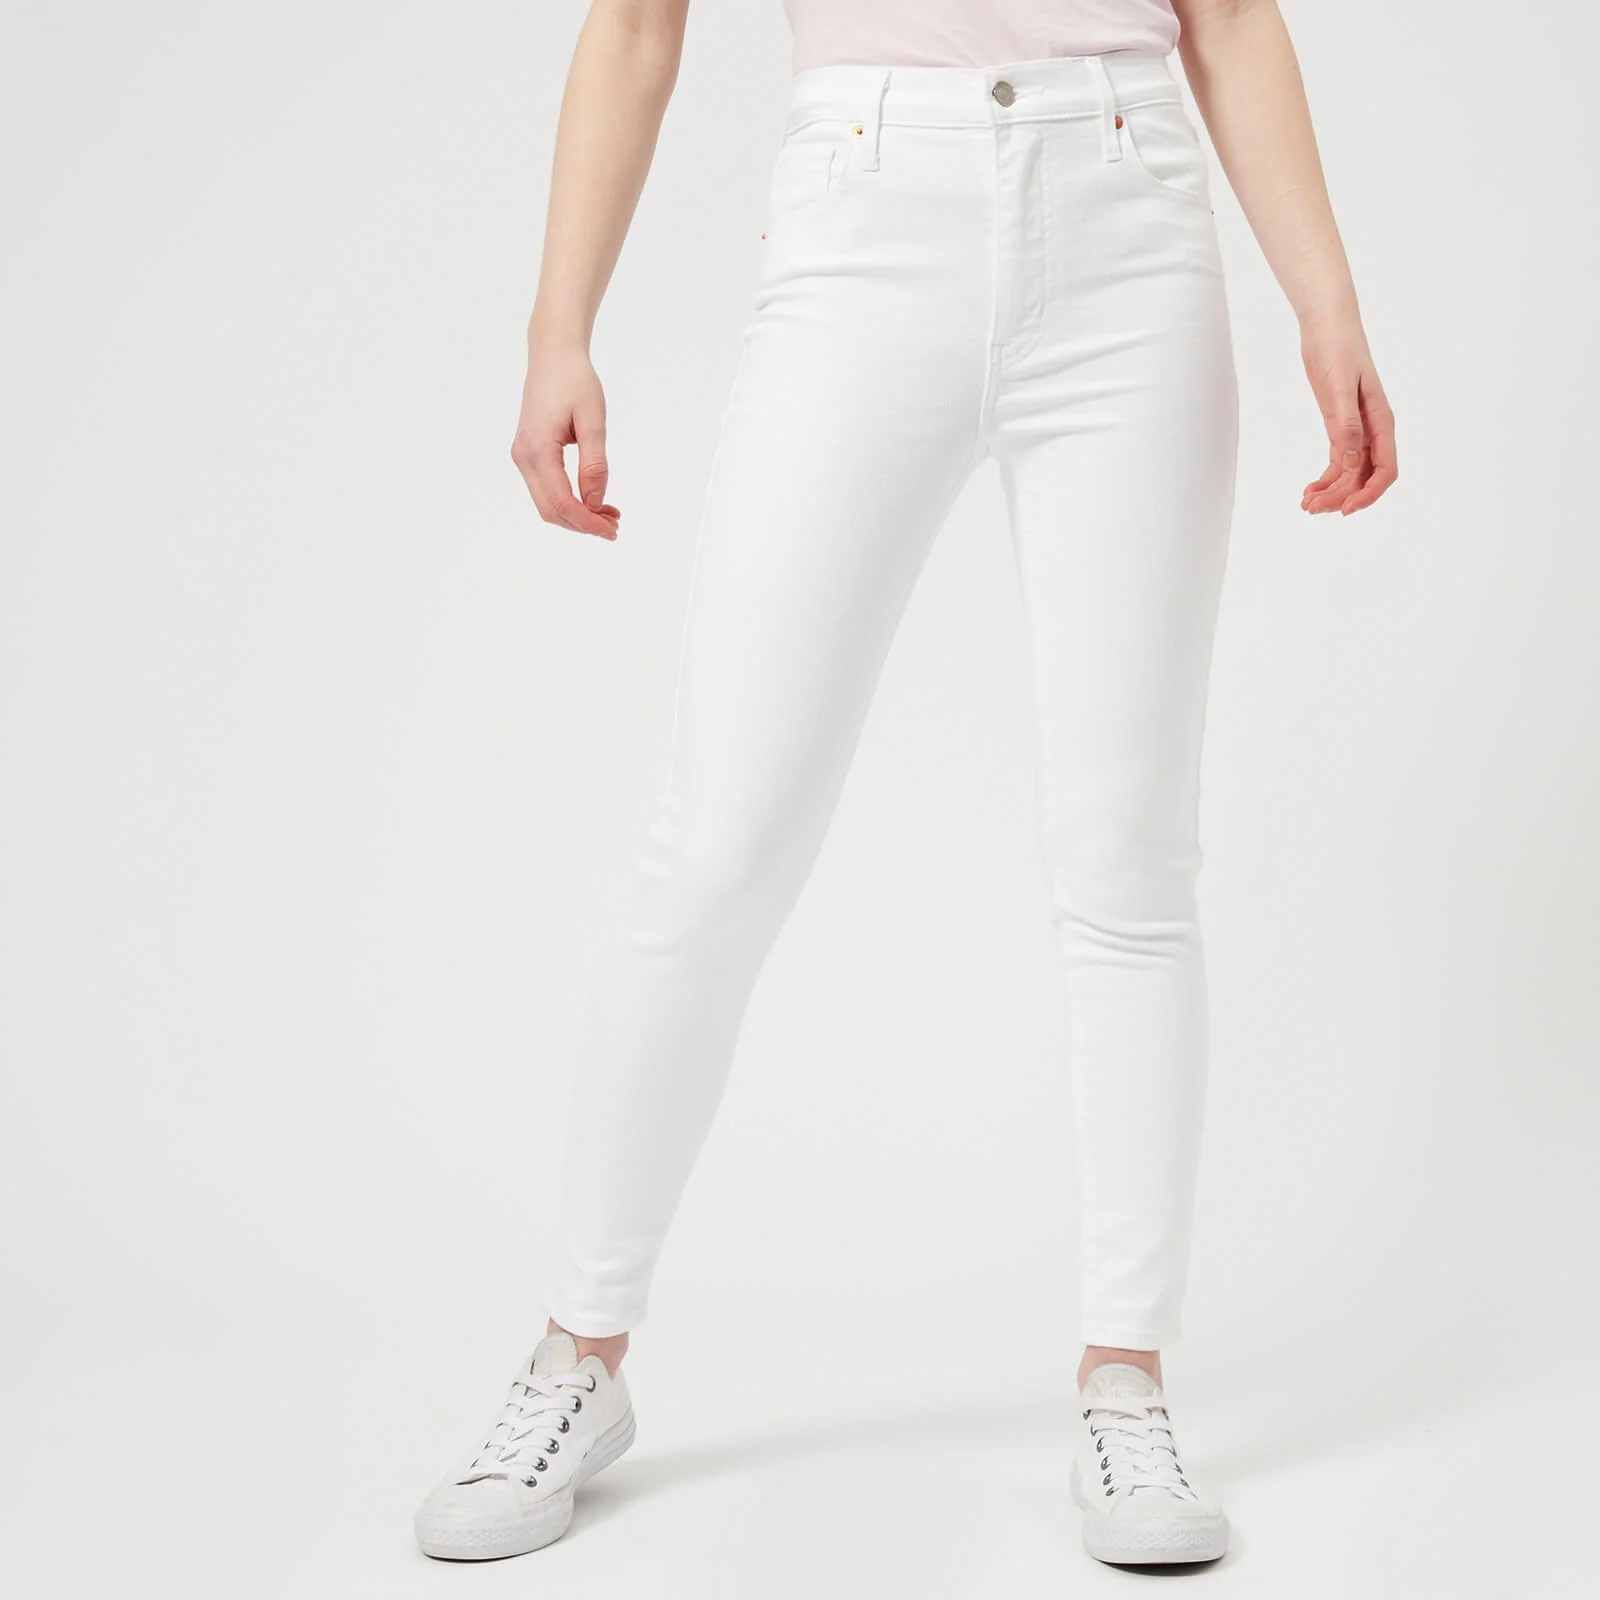 Levi's Women's Mile High Ankle Skinny Jeans - Western White Image 1